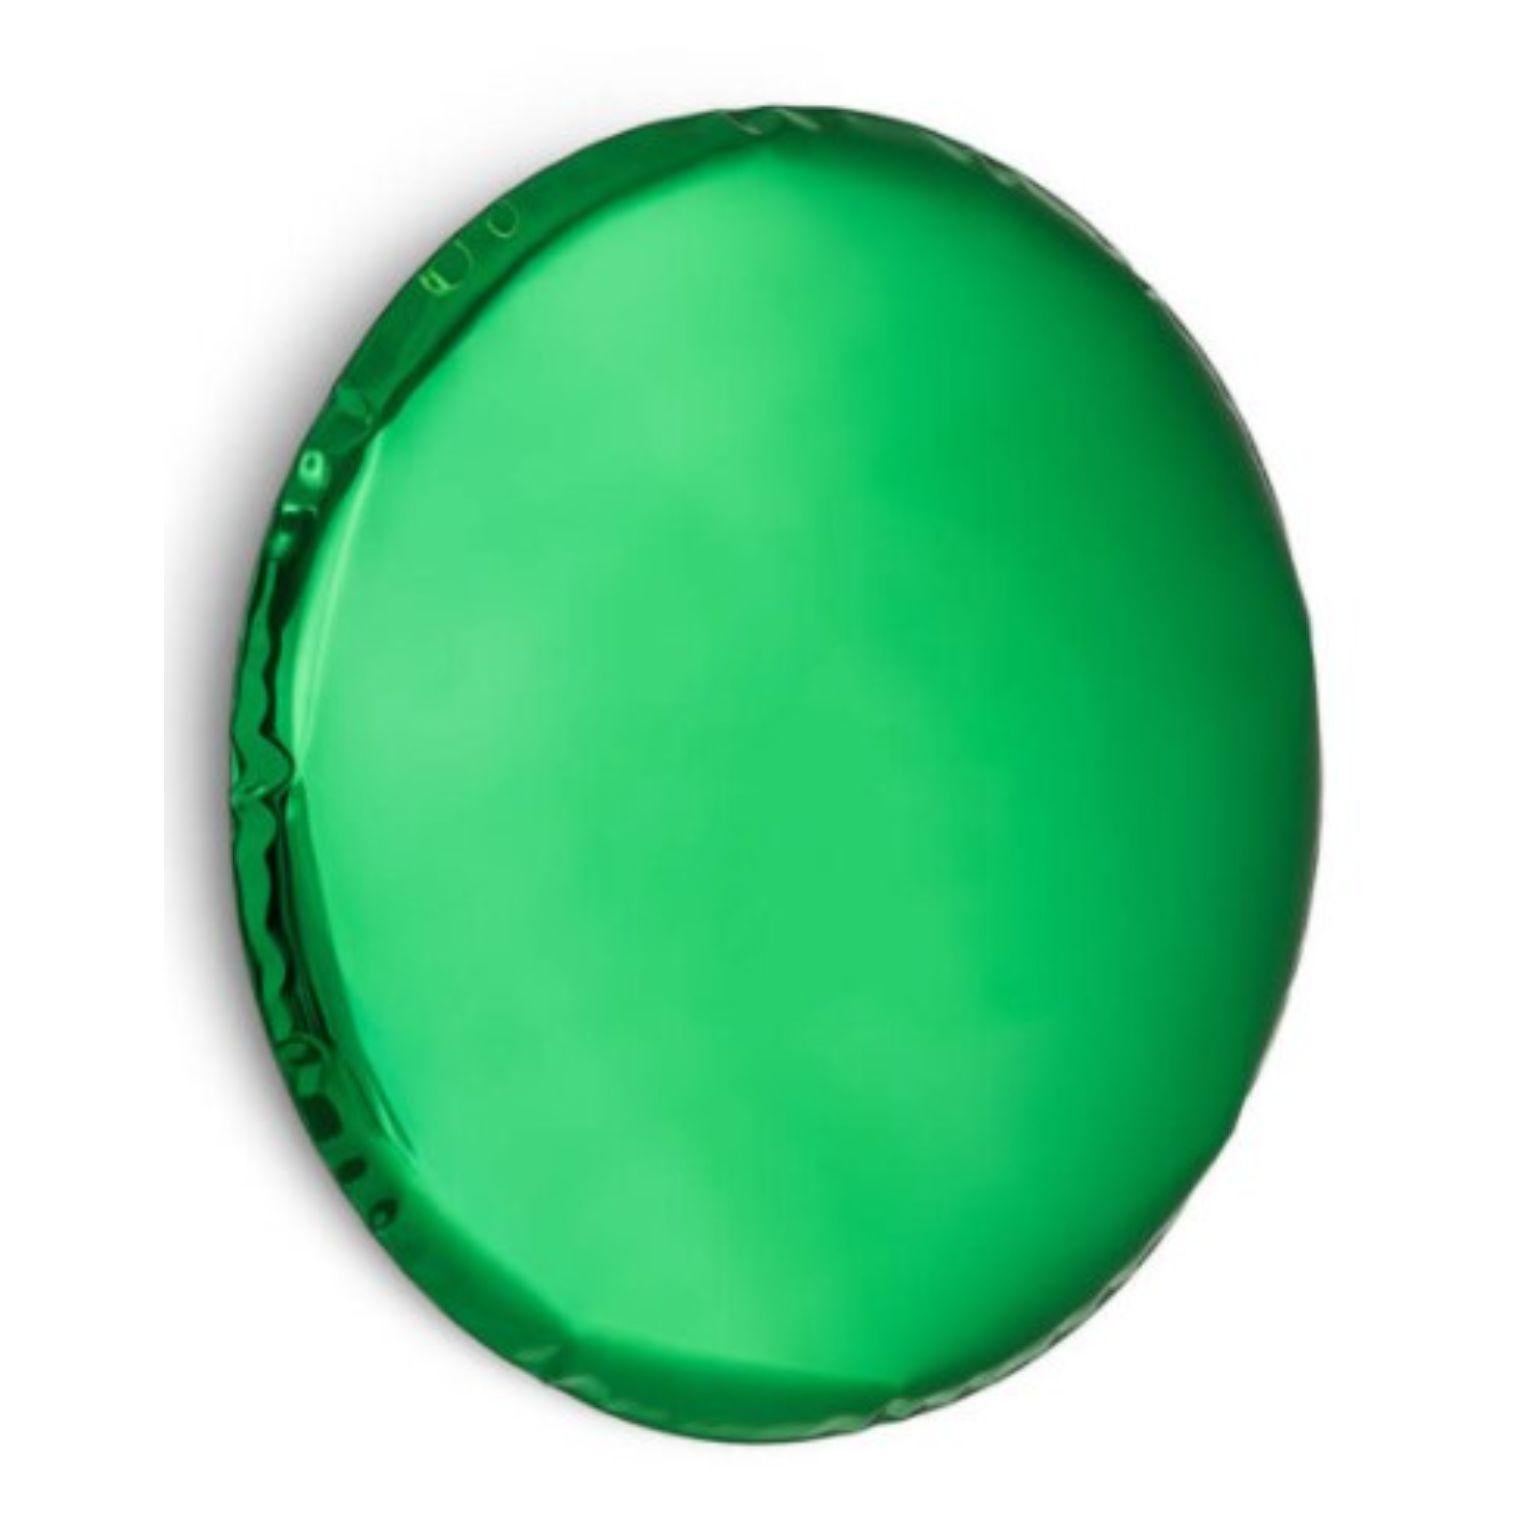 Emerald Oko 120 sculptural wall mirror by Zieta
Dimensions: Diameter 120 x Depth 6 cm 
Material: Stainless steel. 
Finish: Emerald.
Available in finishes: Stainless Steel, Deep Space Blue, Emerald, Saphire, Saphire/Emerald, Dark Matter, and Red